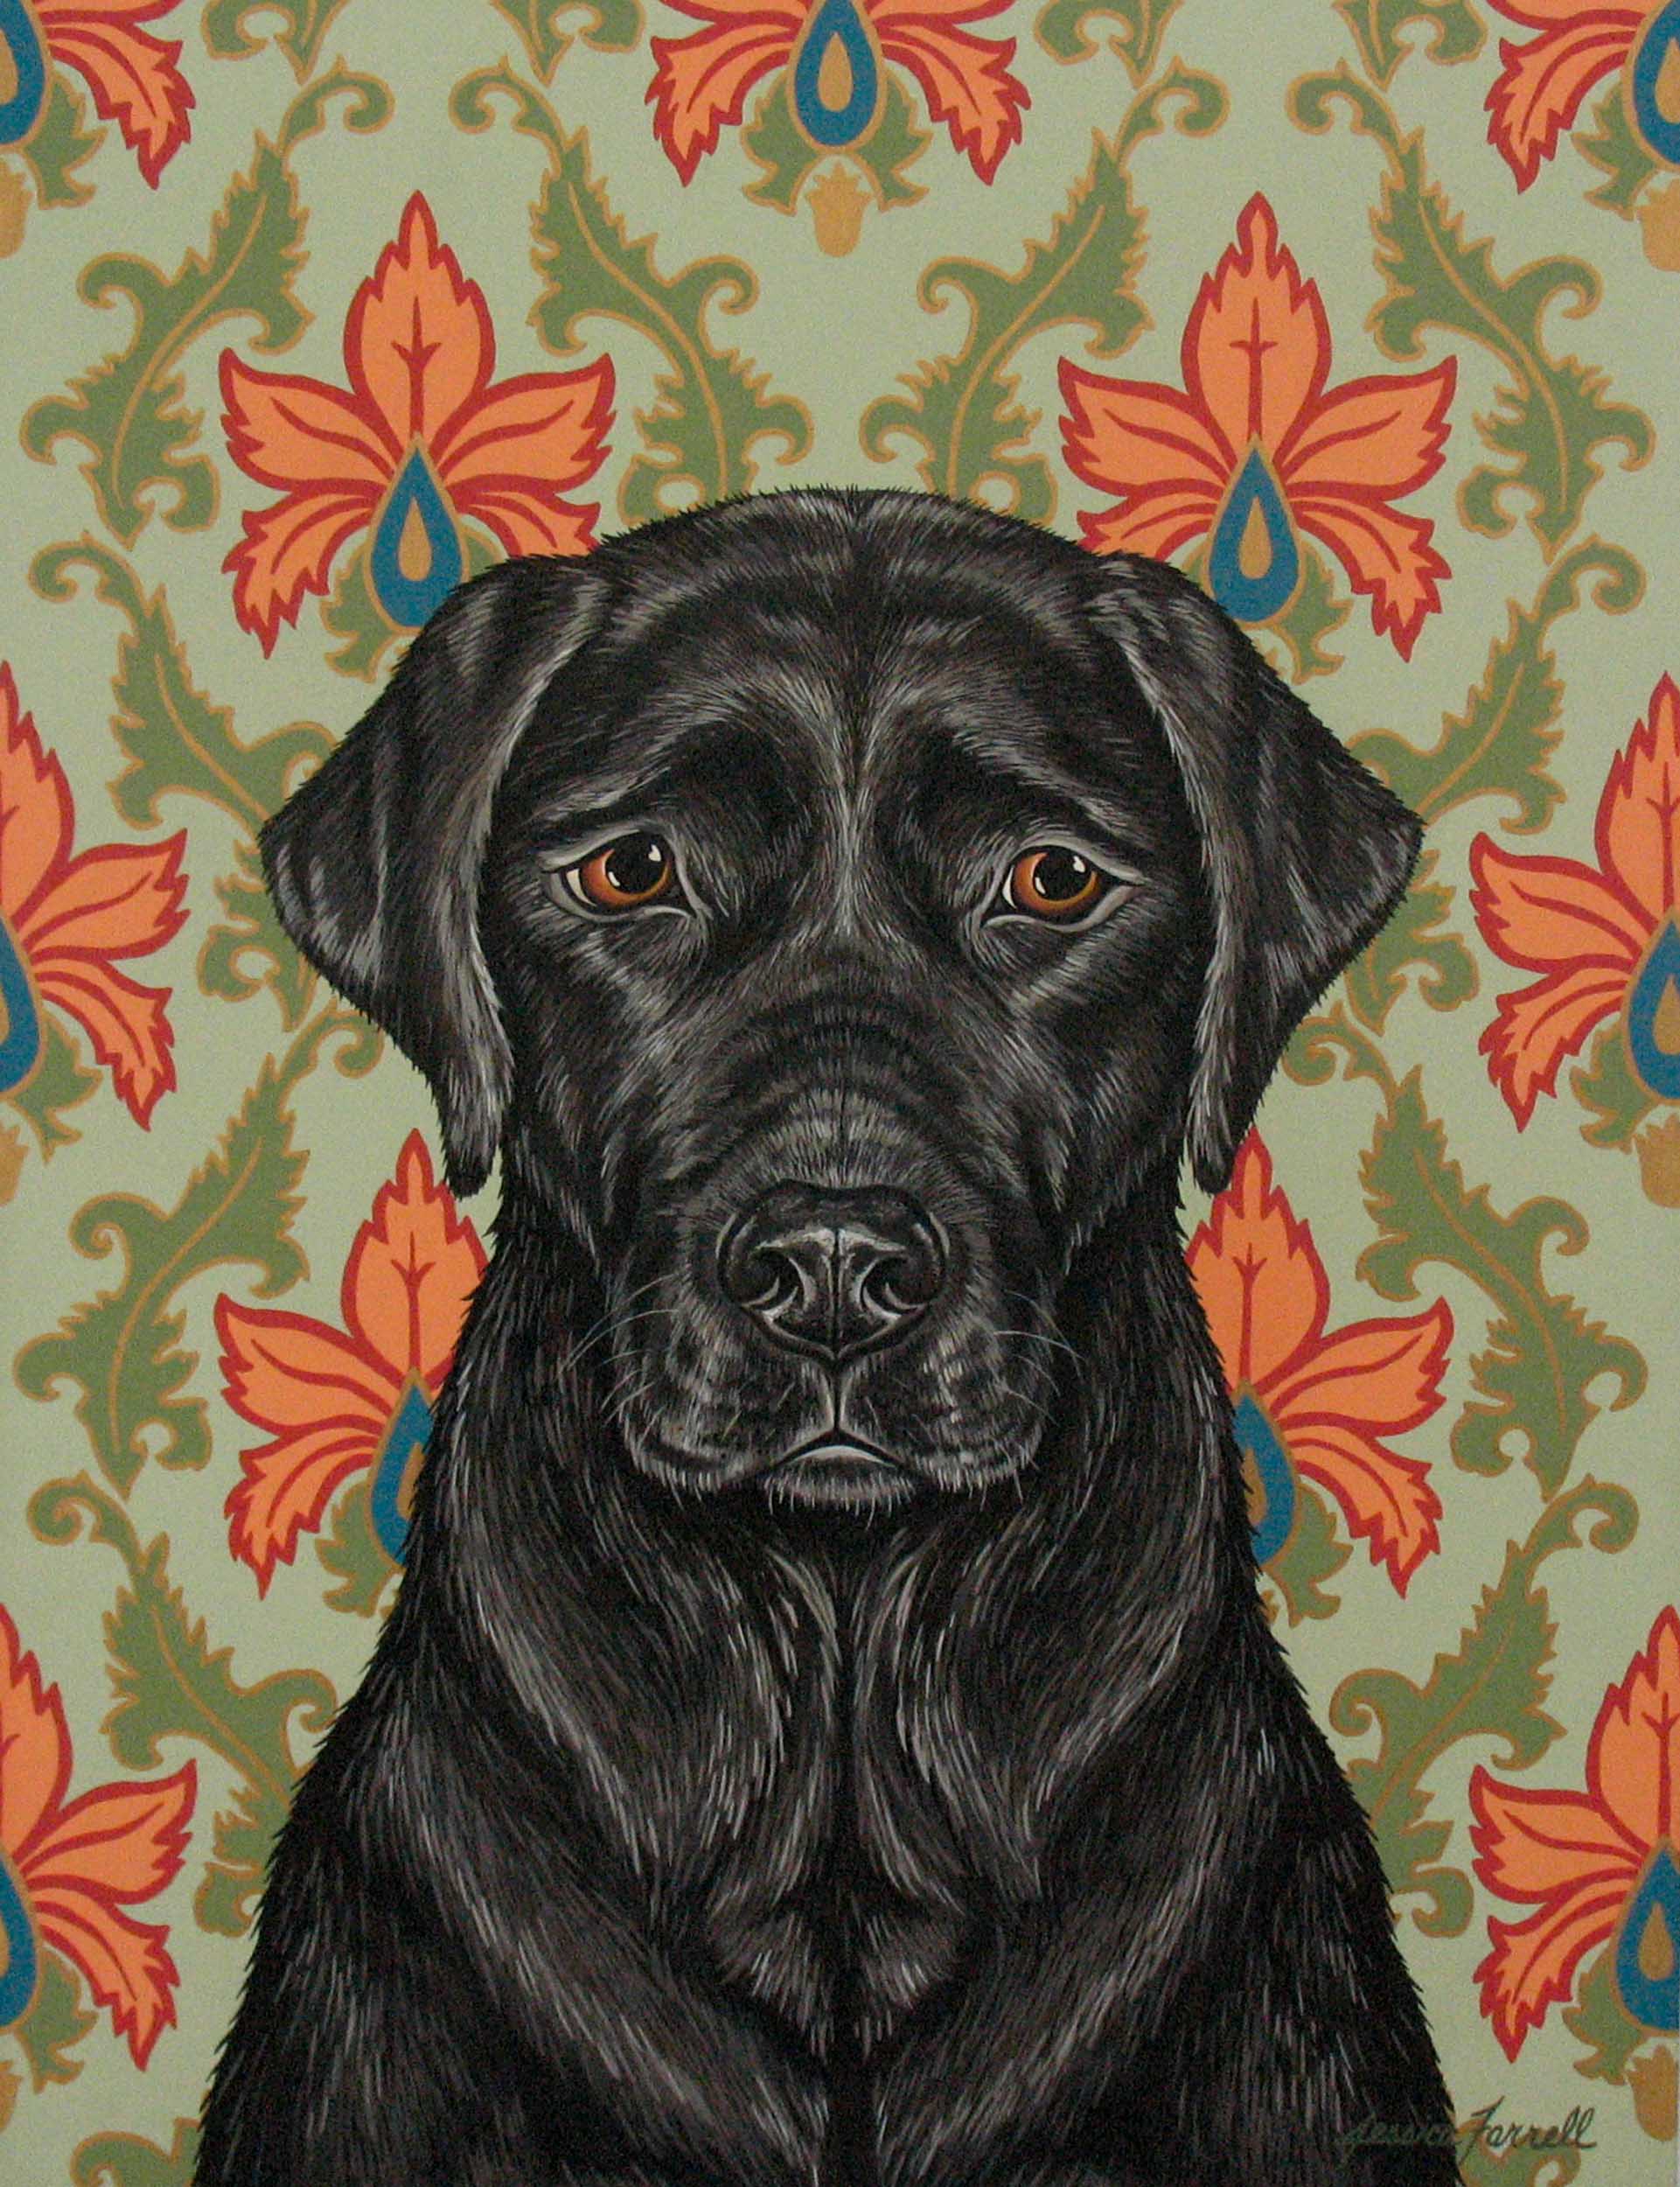   Black Lab ,   Acrylic on wood ,  19 x 14 inches  (private collection) 